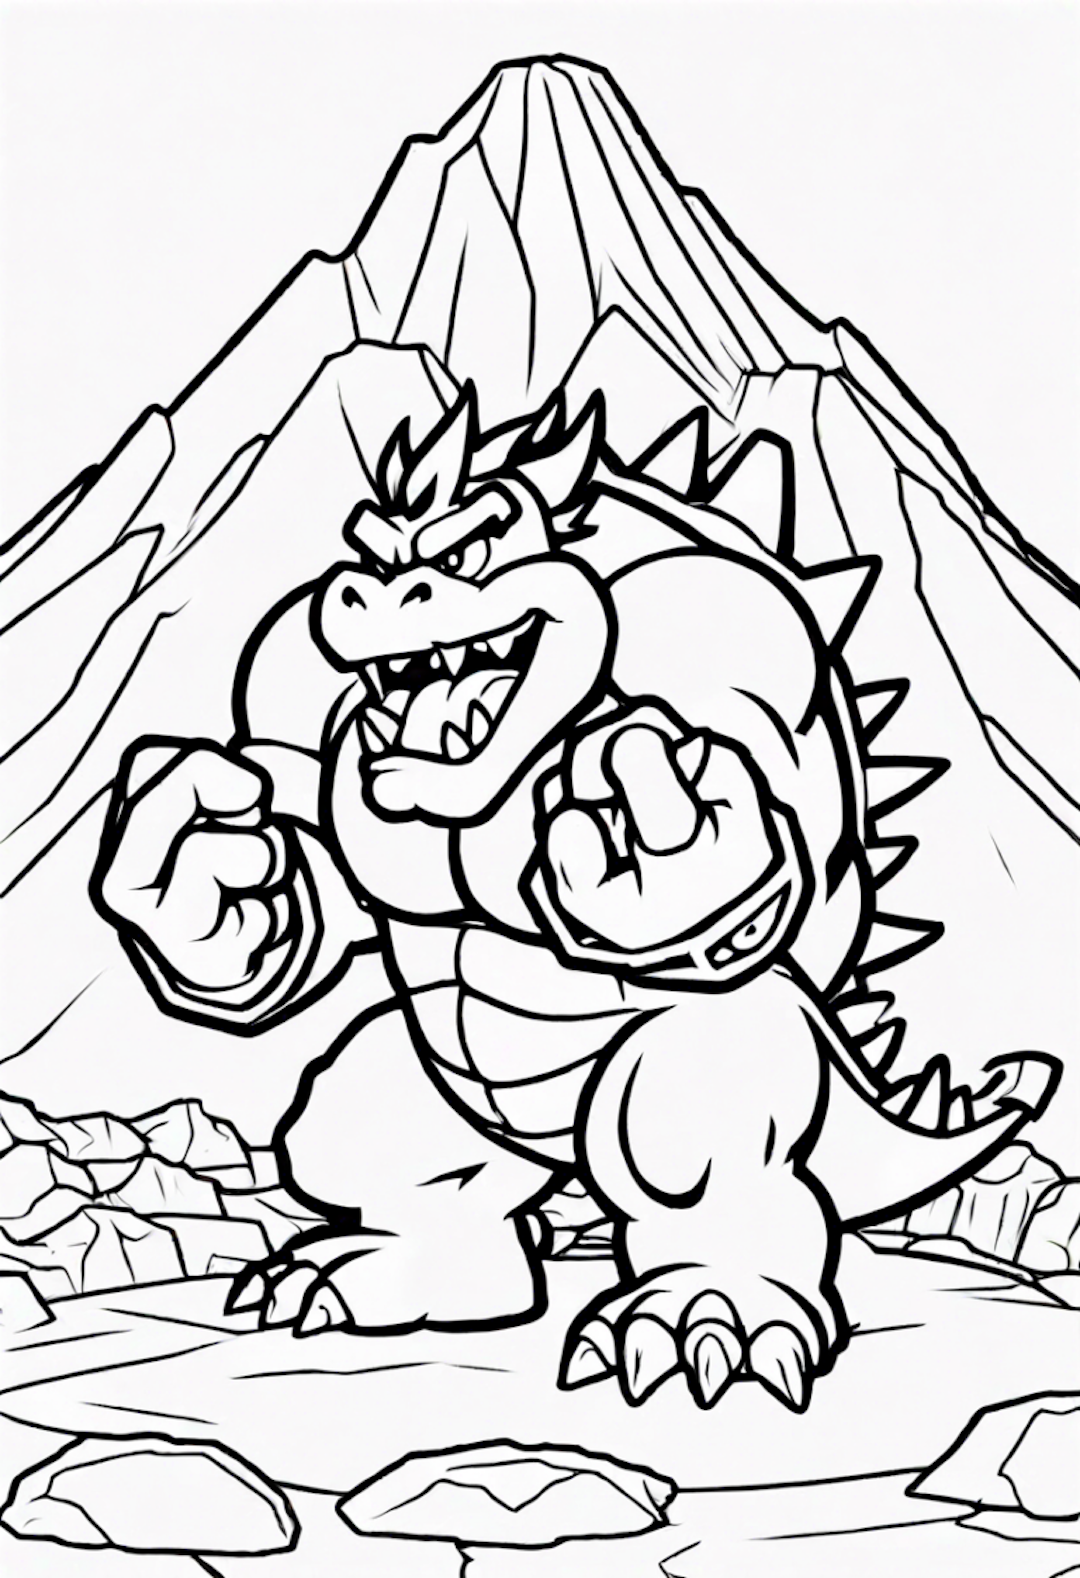 Bowser in the Mountainous Wilderness coloring pages